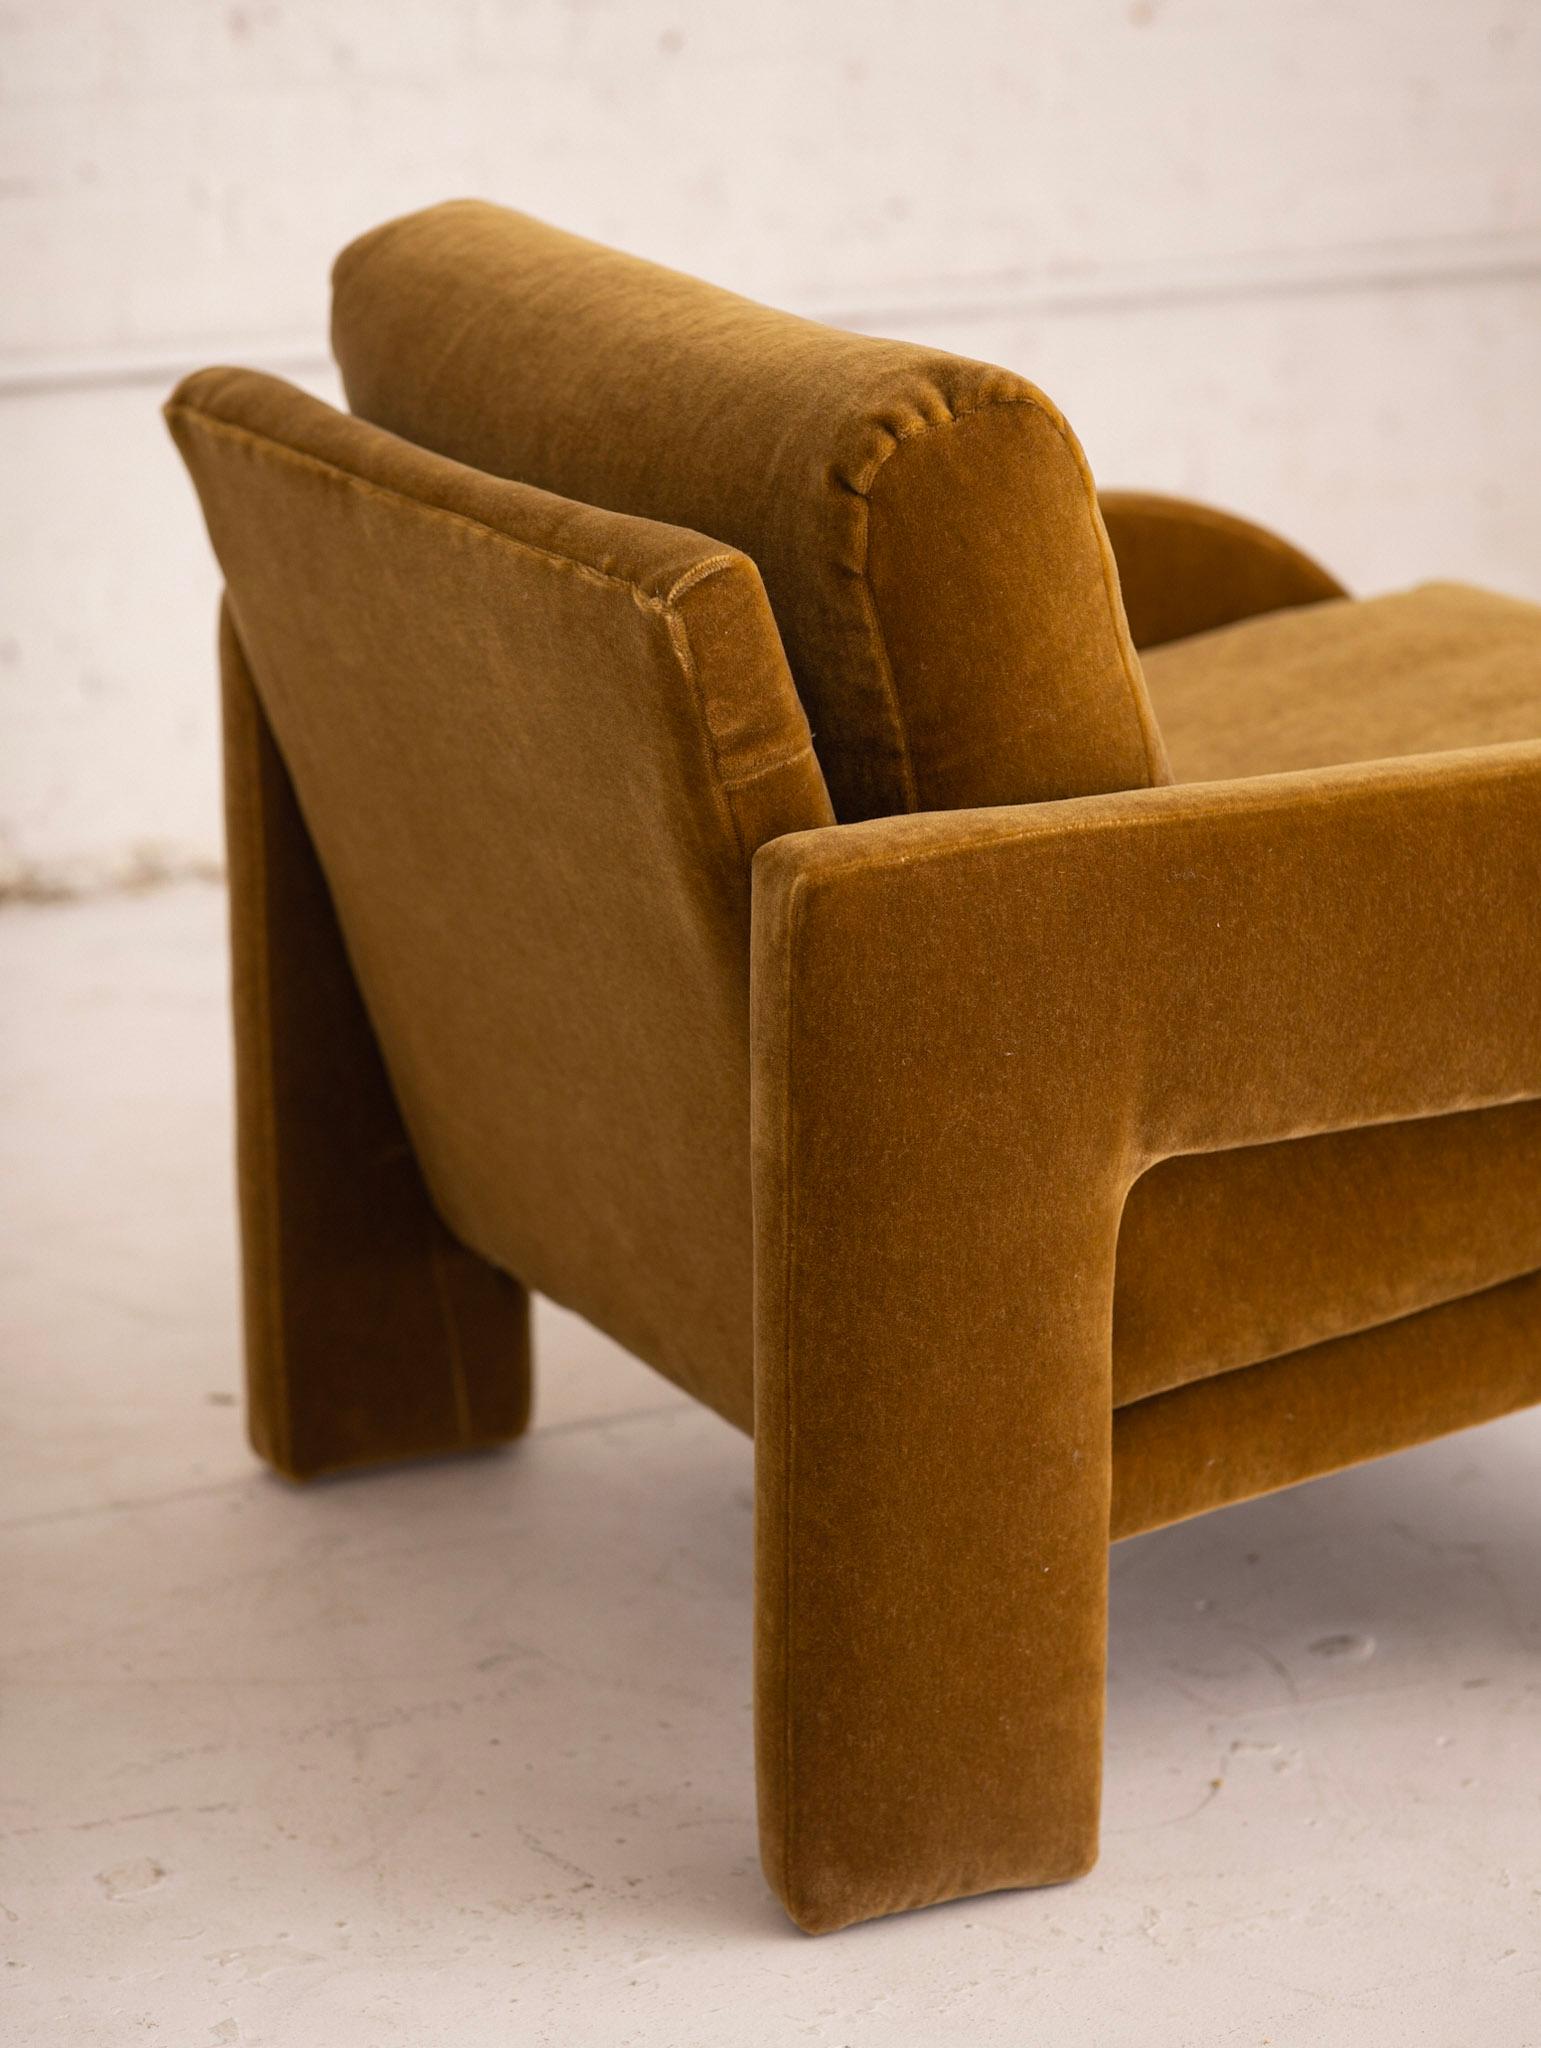 1980s Postmodern Architectural Armchair in Camel Mohair 2